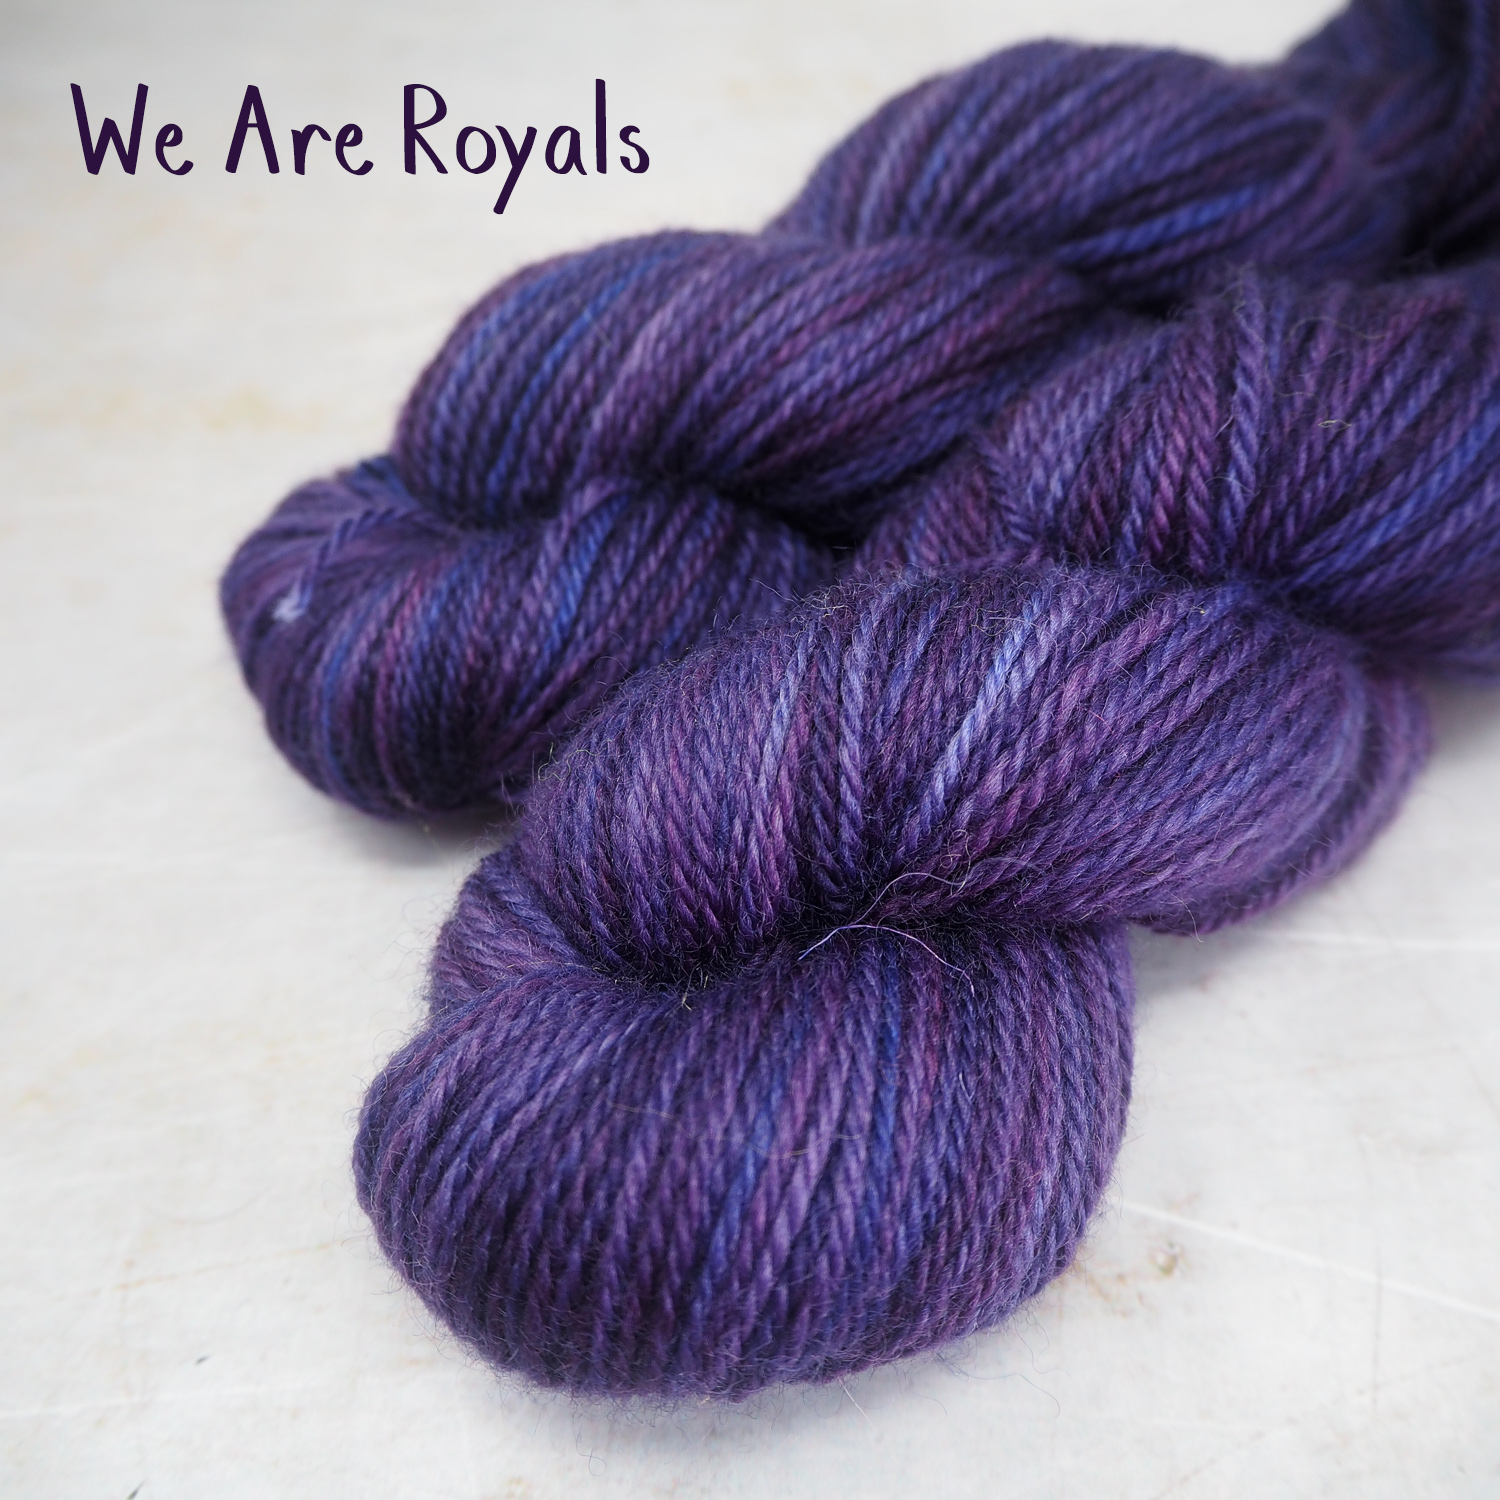 Two skeins of soft, DK-weight yarn, hand-dyed a in deep blues and purples. 